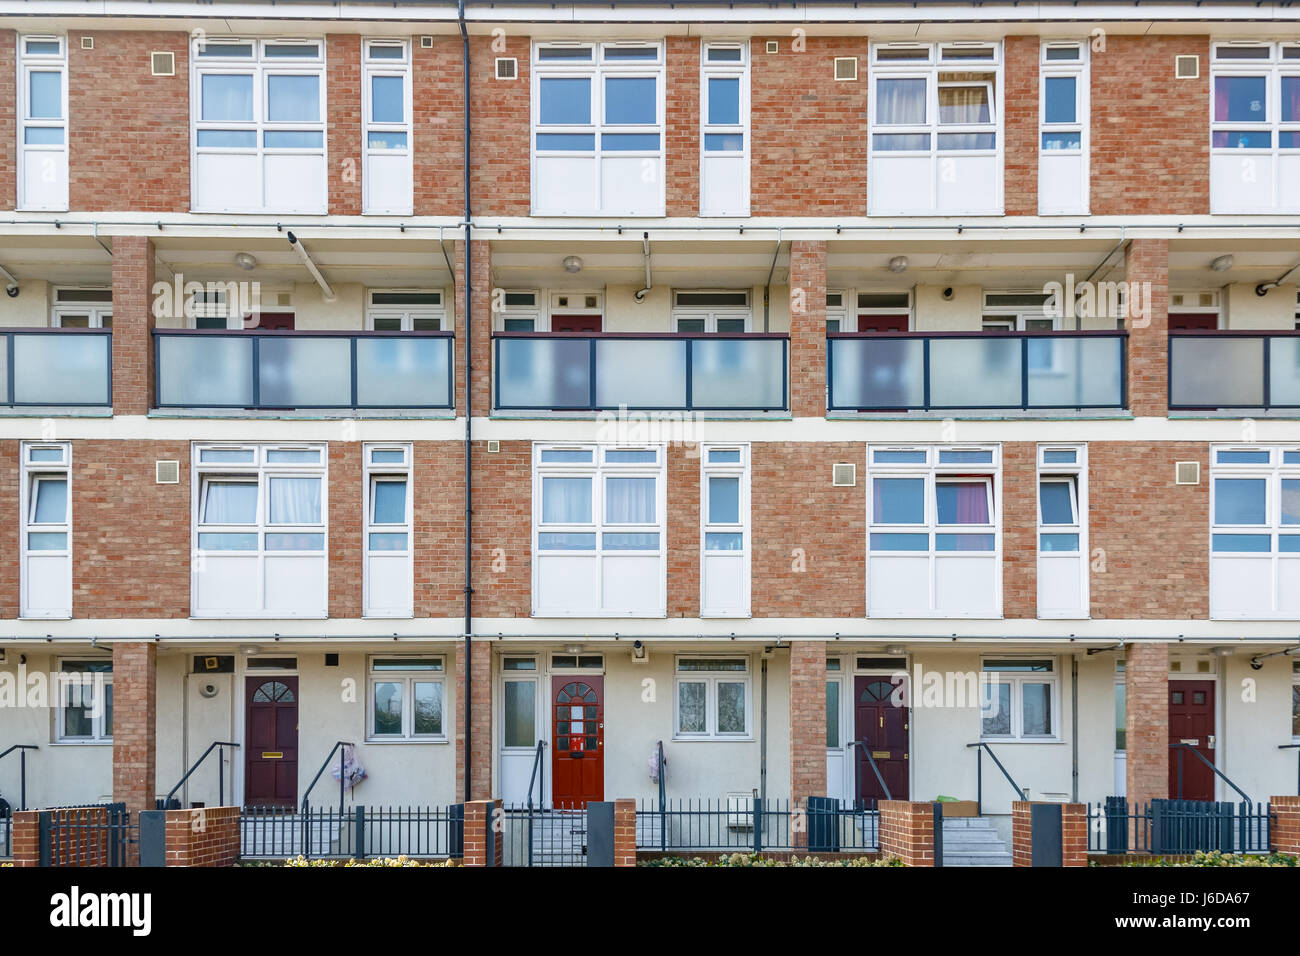 Facade of council housing flats in Brownfield, East London Stock Photo